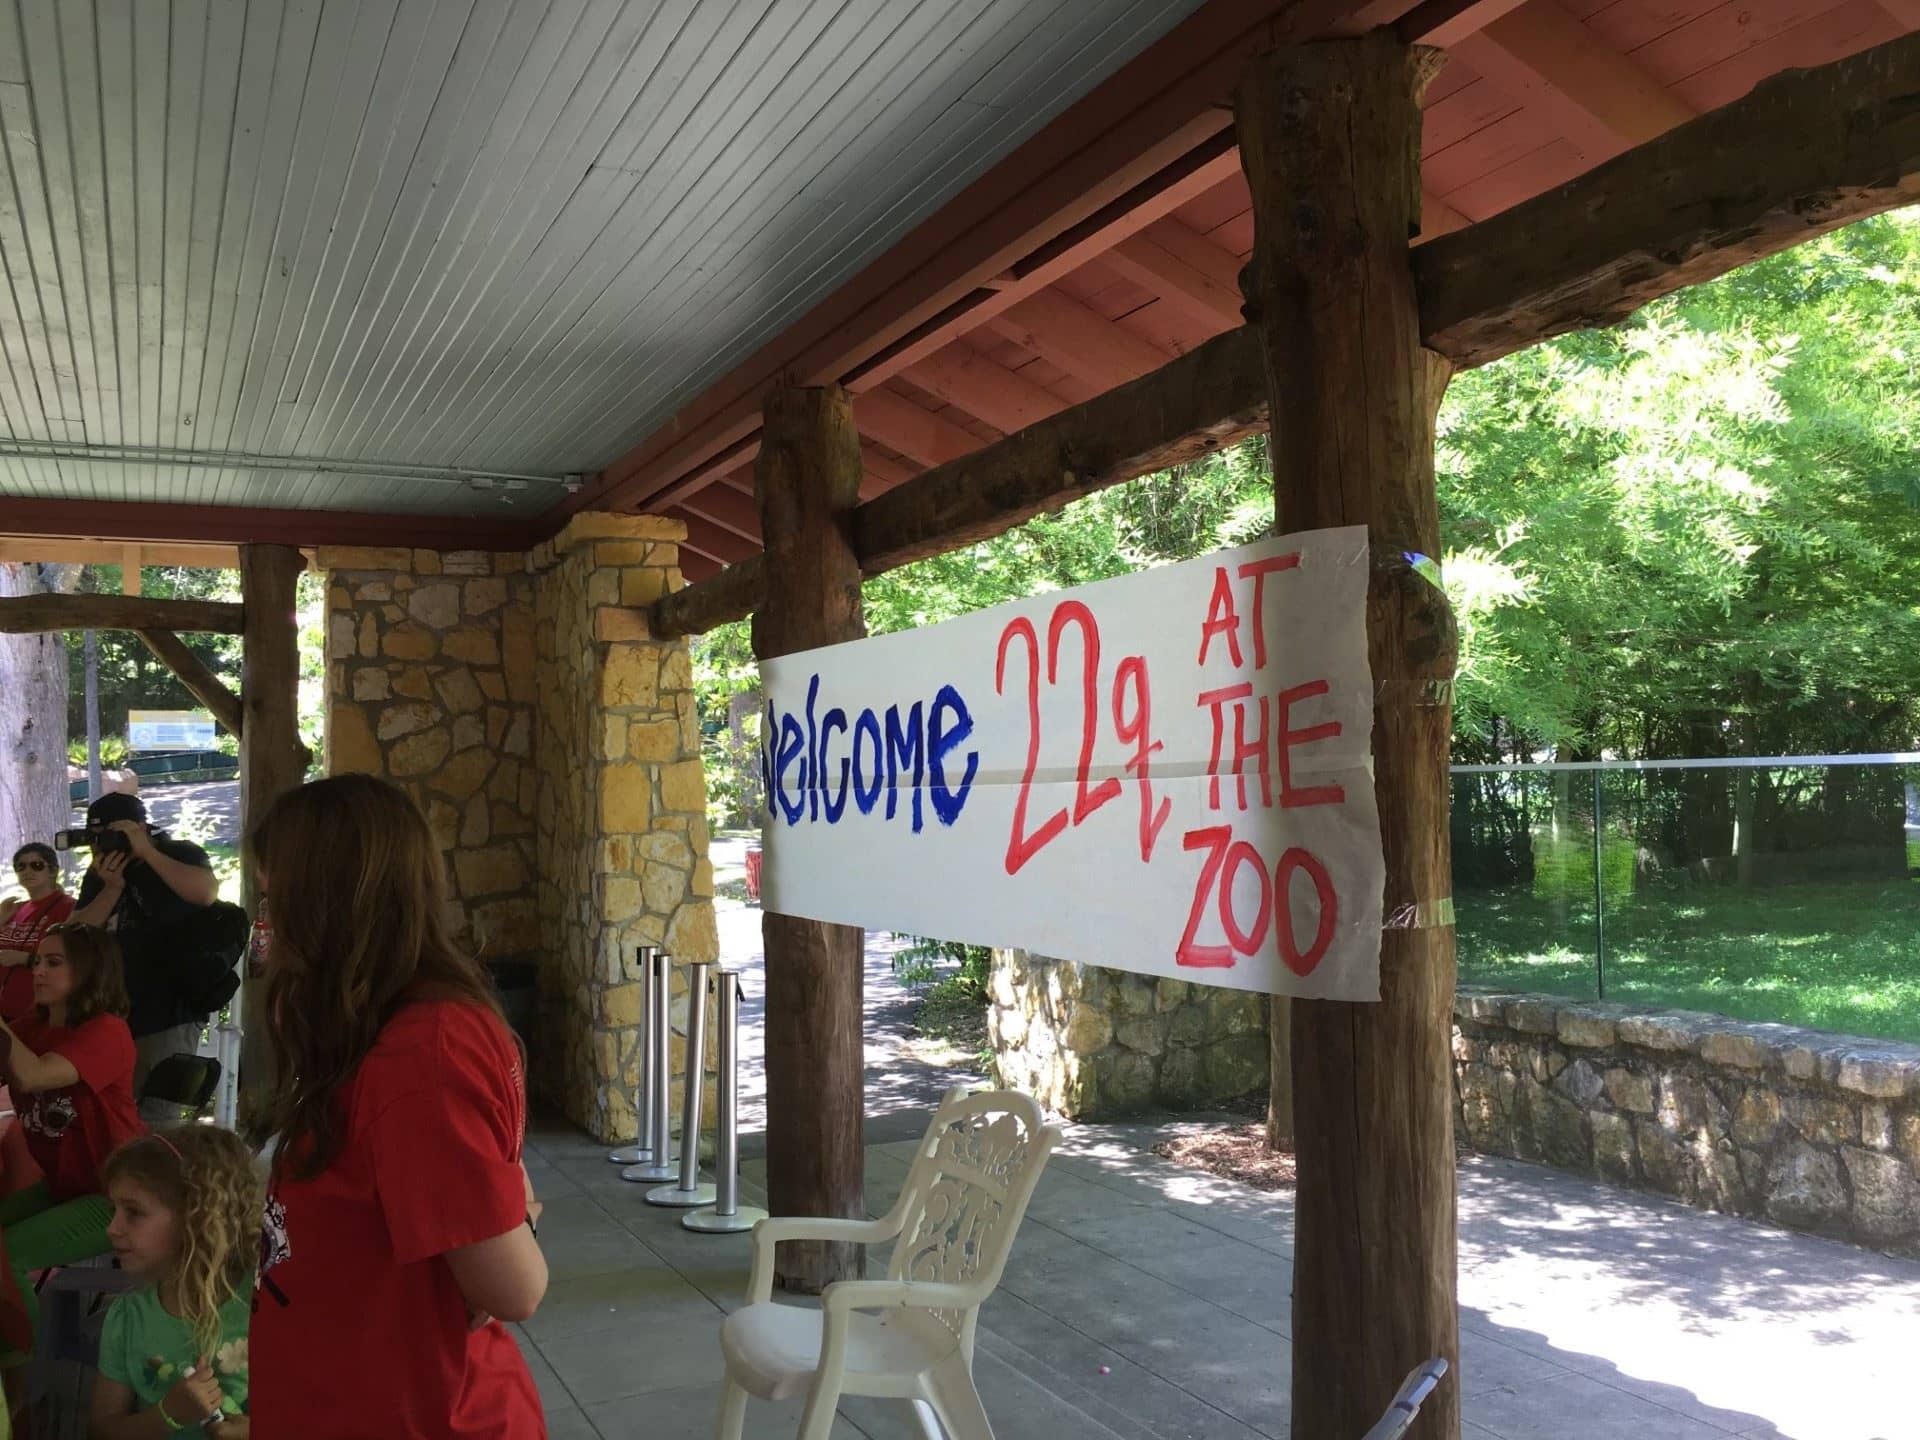 Sign that reads "22q at the Zoo" with people standing near. 